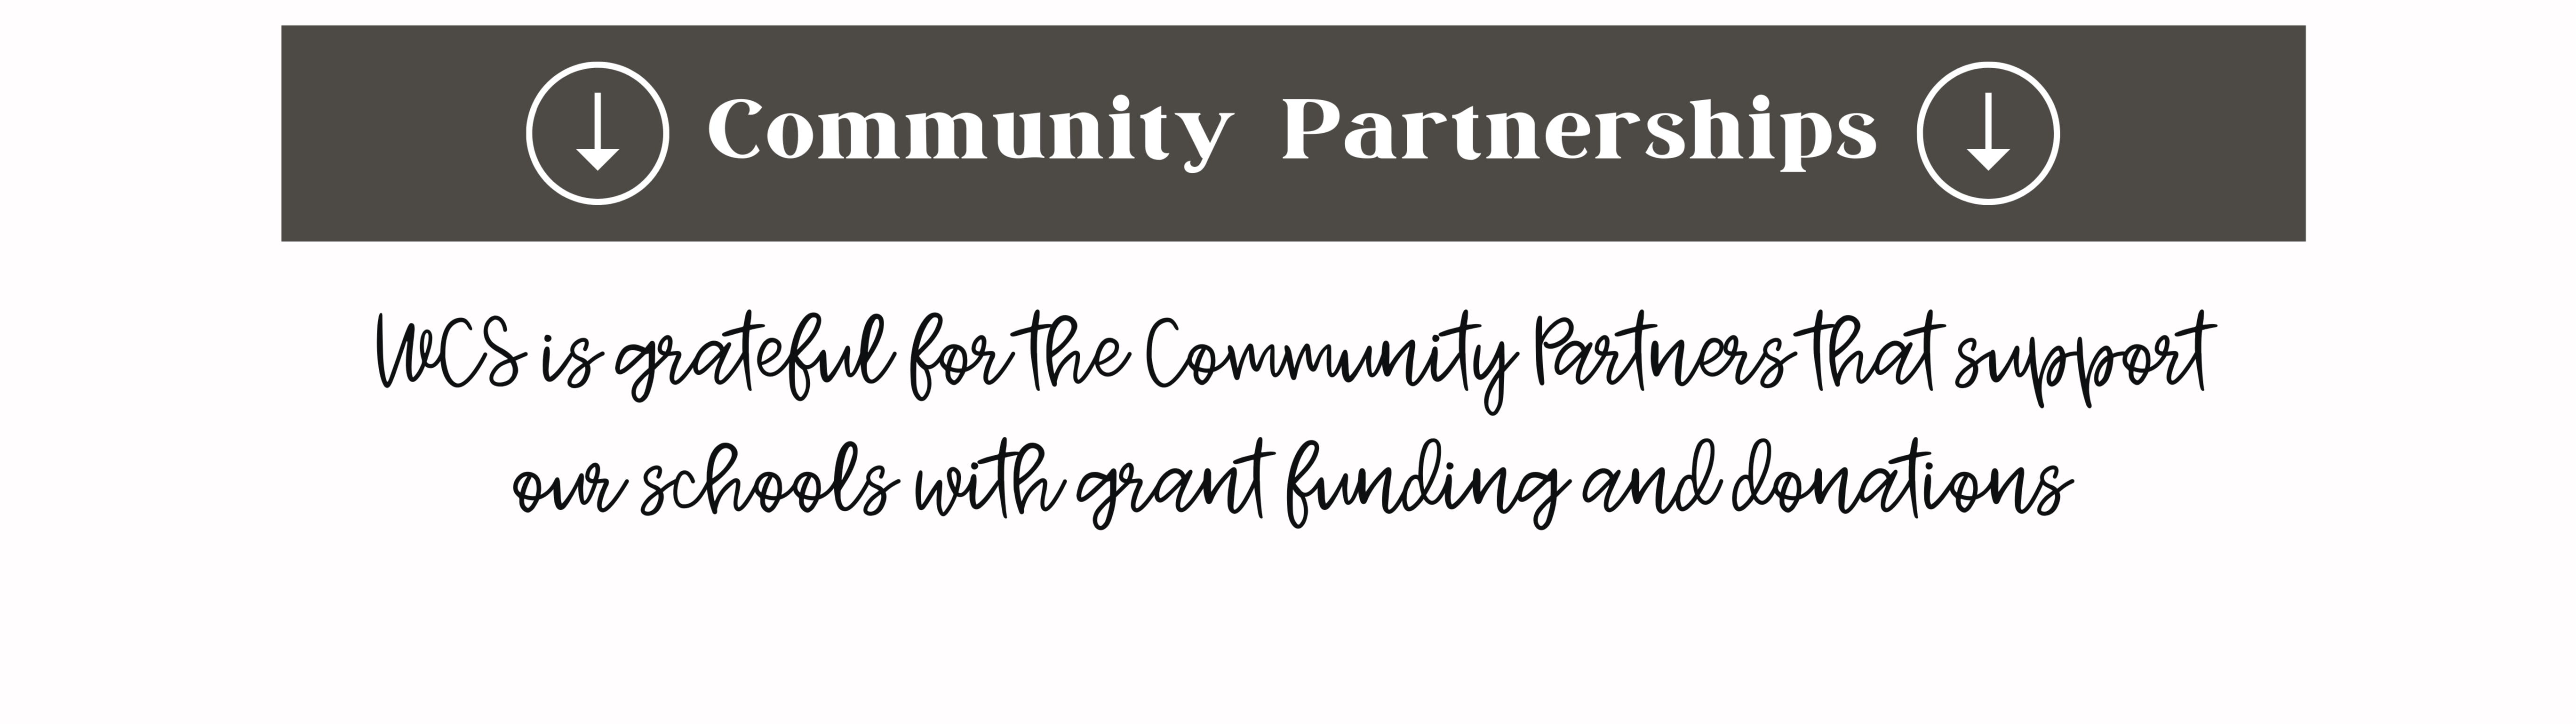 Community Partnerships; WCS is grateful for the Community Partners that support our schools with grant funding and donations